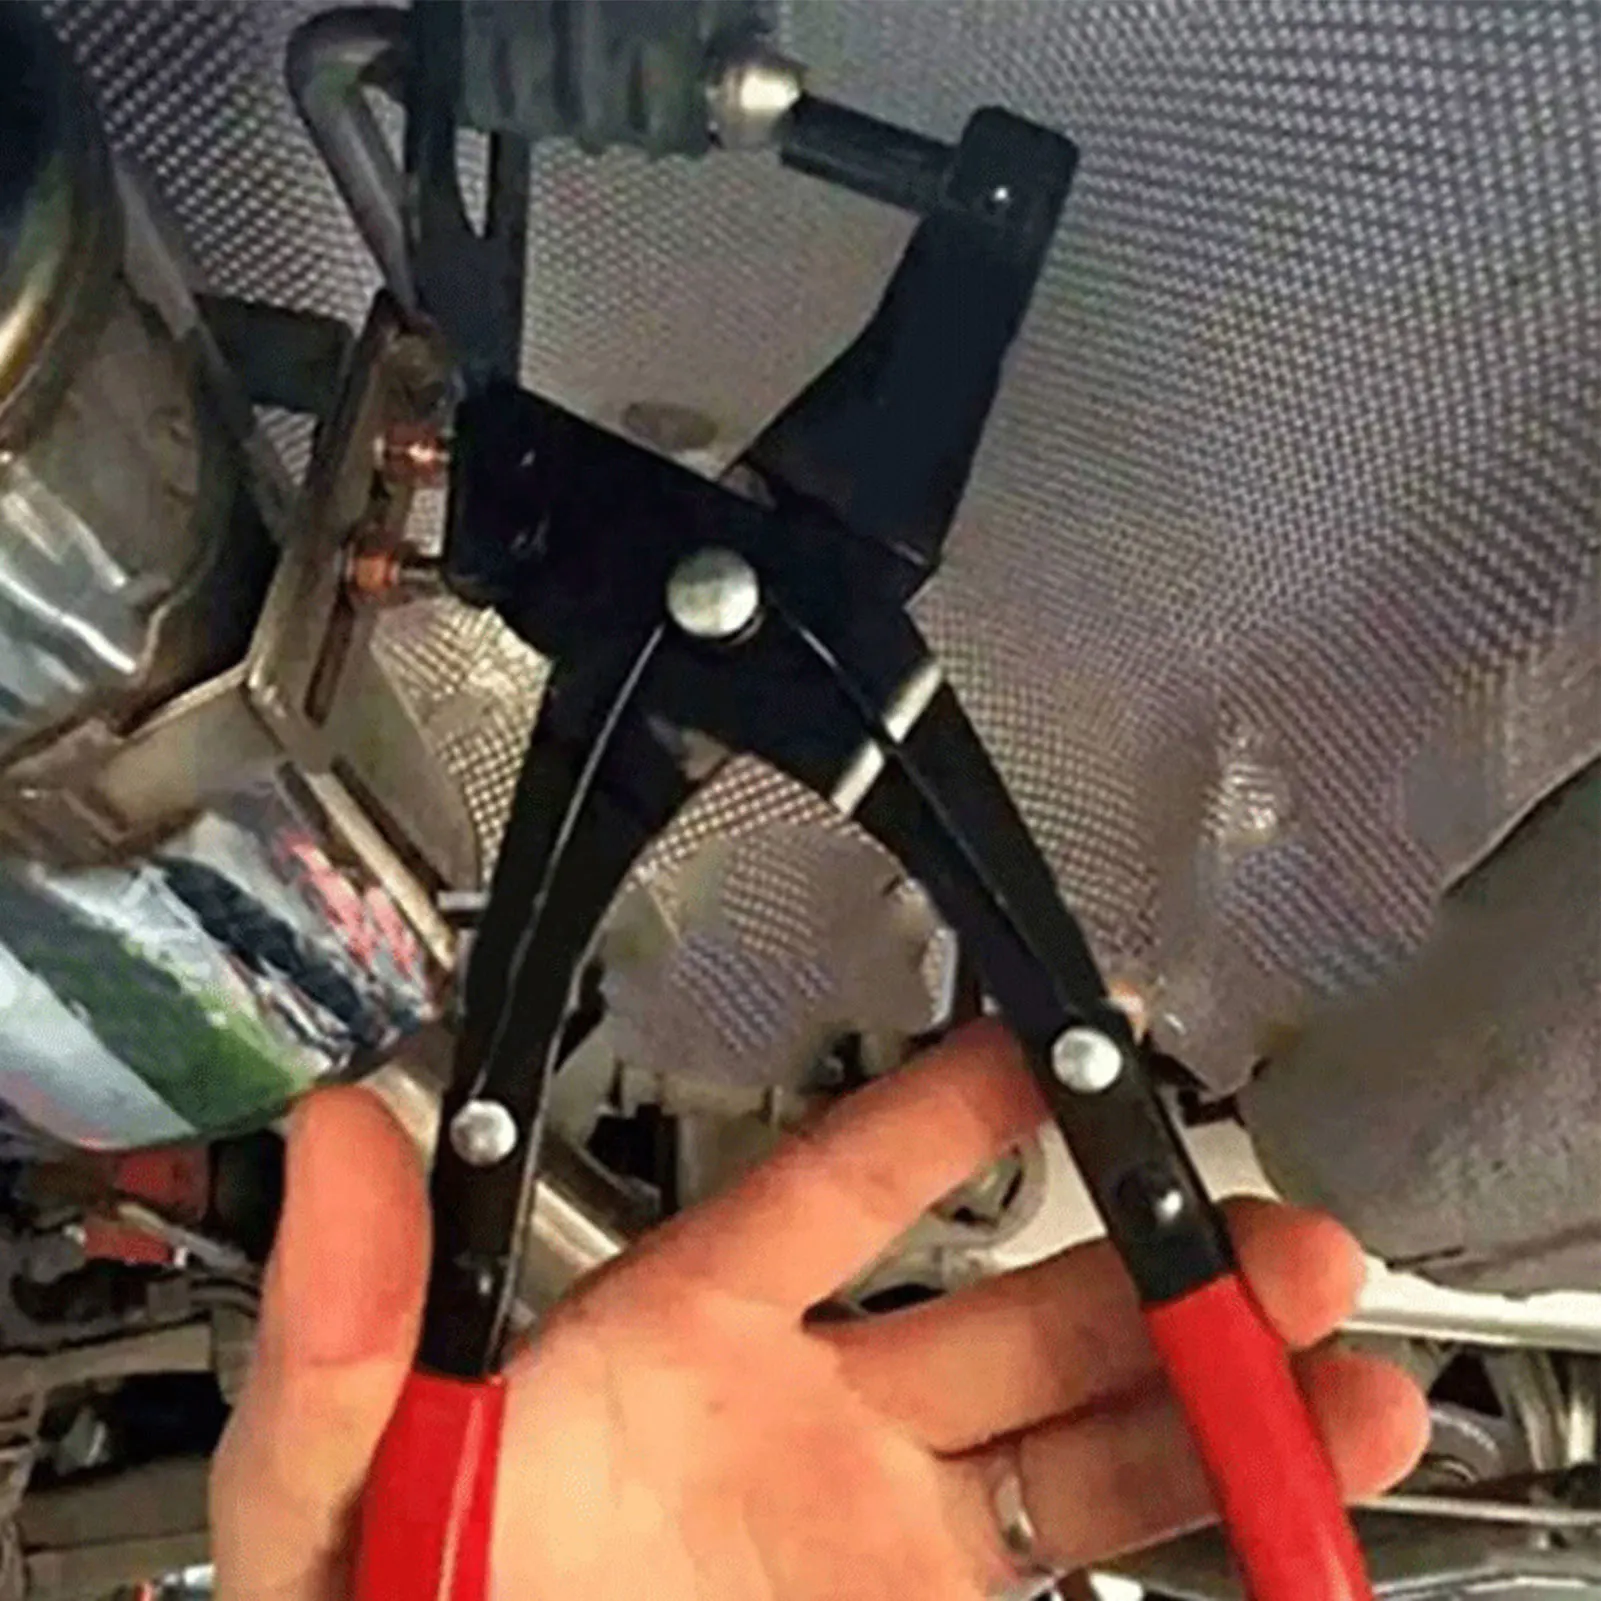 

Exhaust Hanger Removal Pliers Exhaust Grommet Pliers 25 Degree Offset for Access in Hard to Reach Places Essential Tool